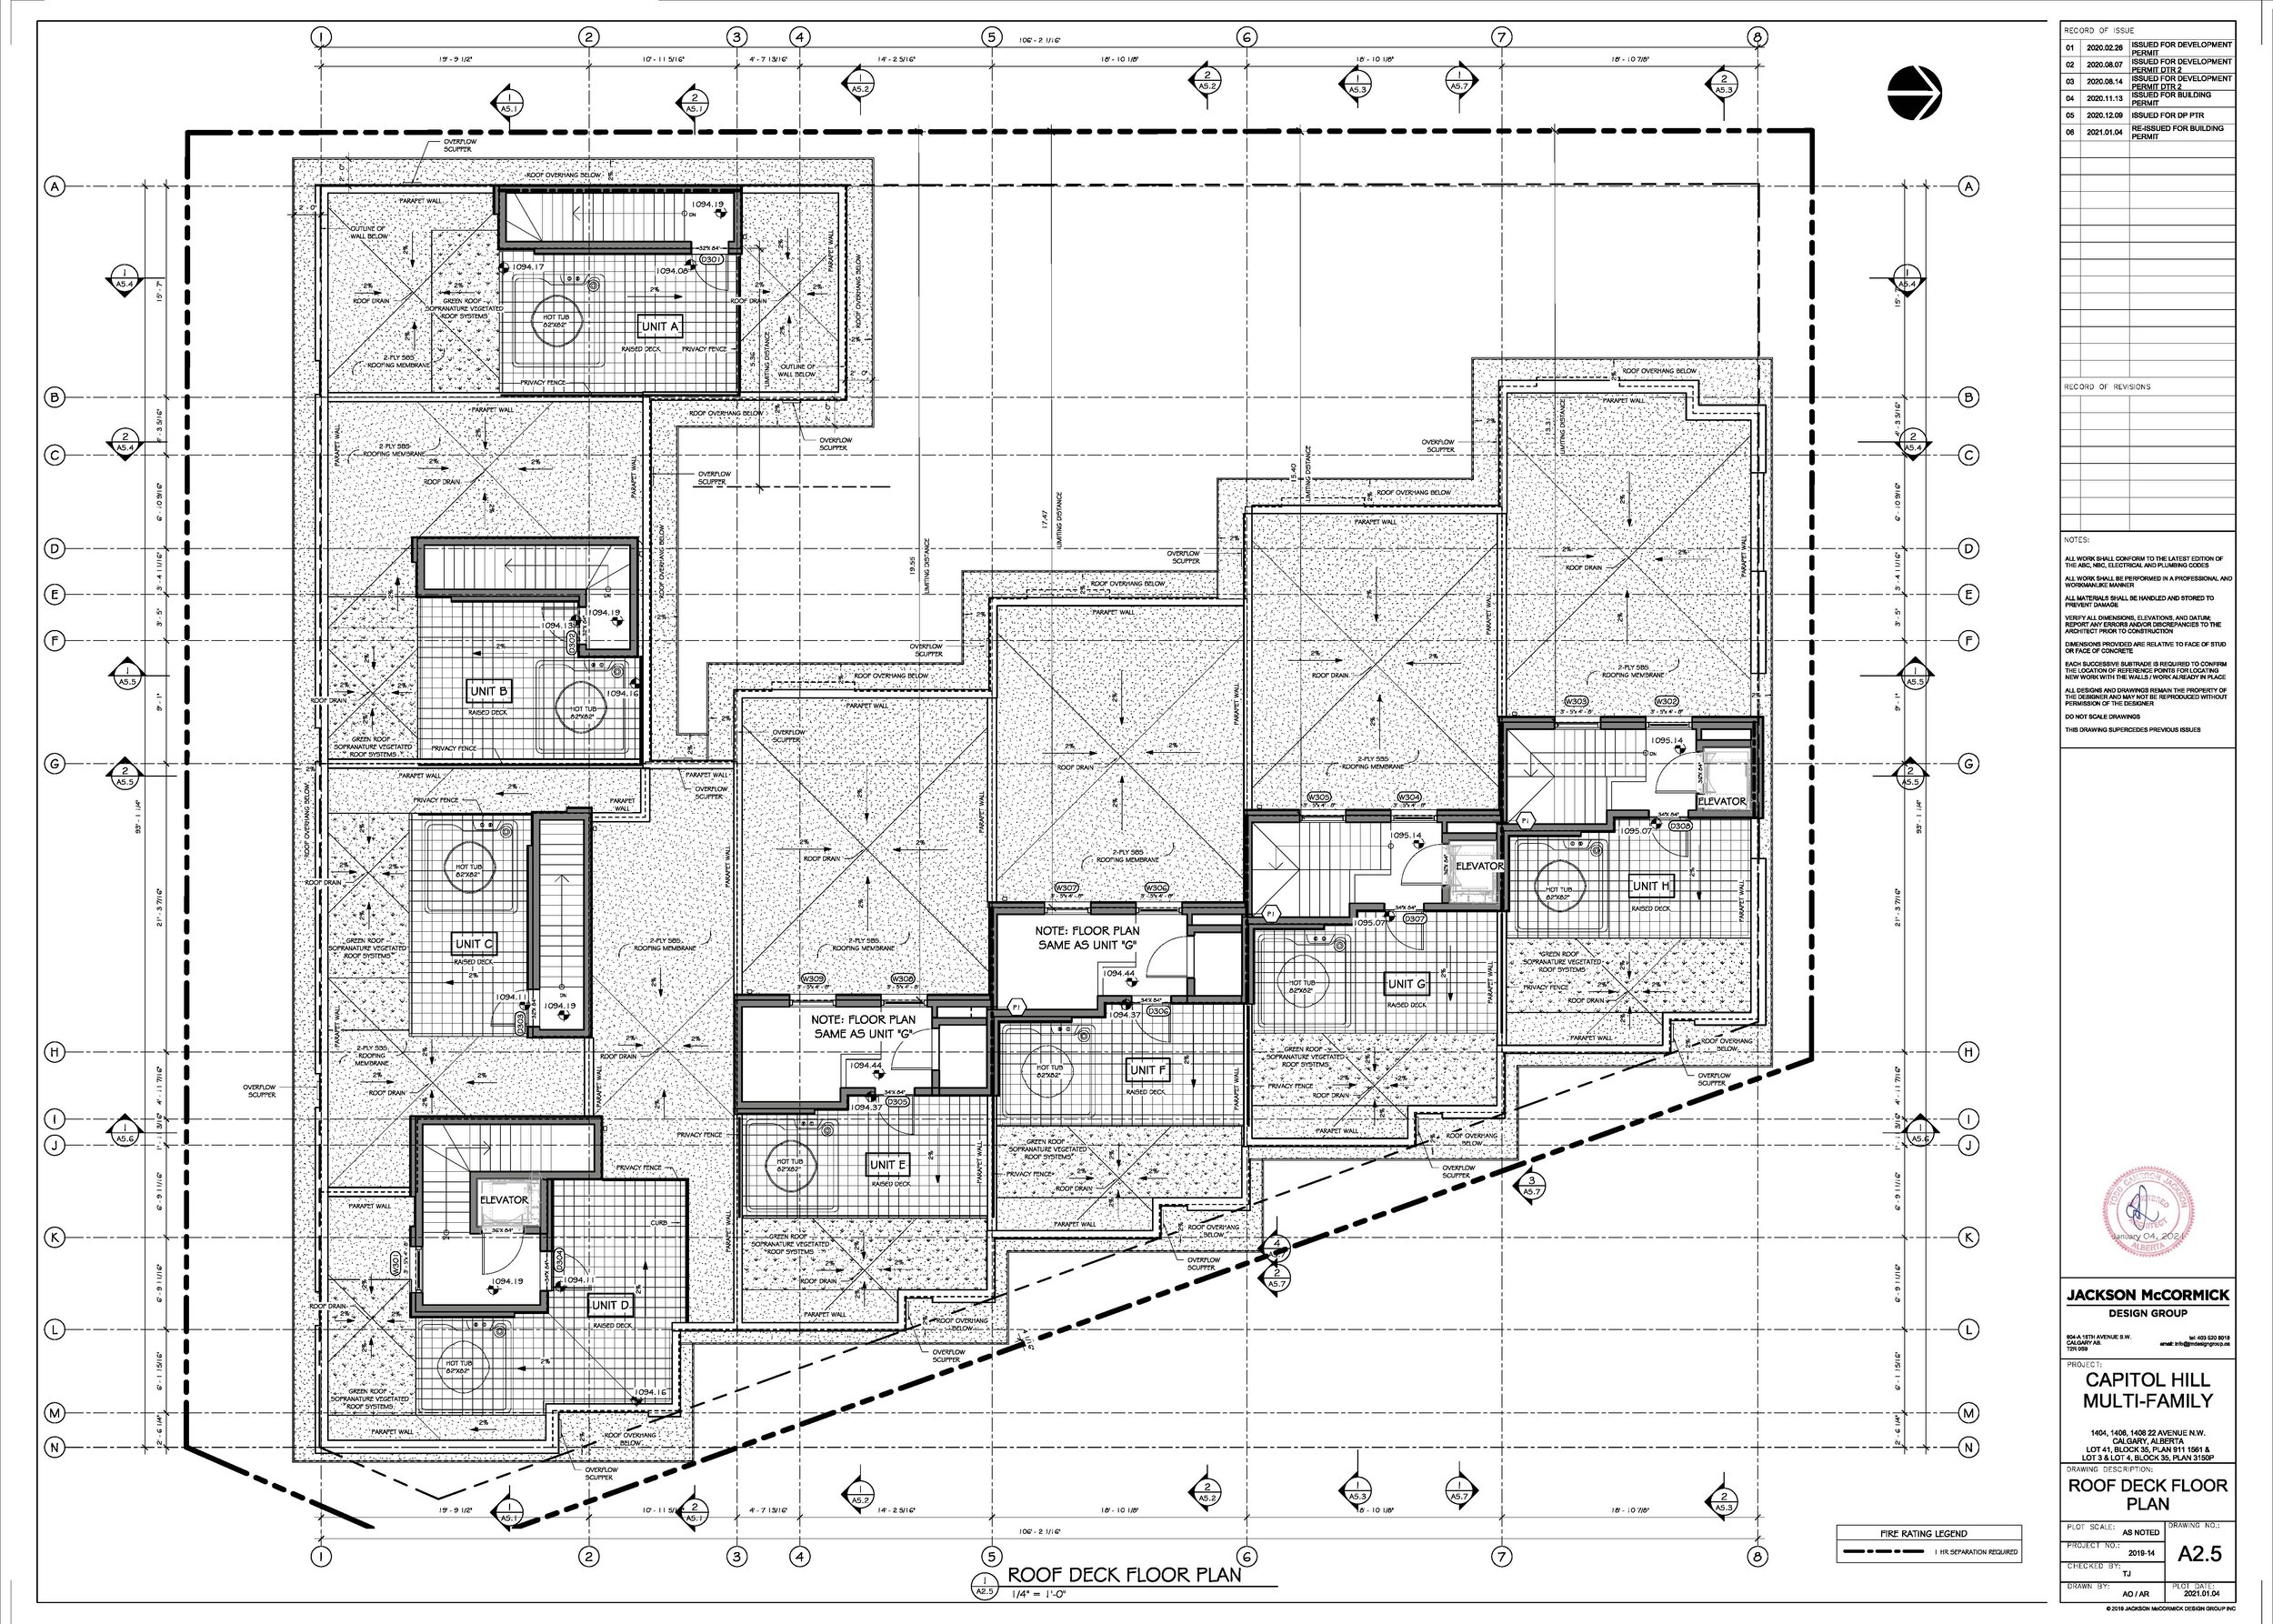 2021.01.04 - CAPITOL HILL MULTI-FAMILY - ARCH BP DRAWINGS_Page_11.jpg